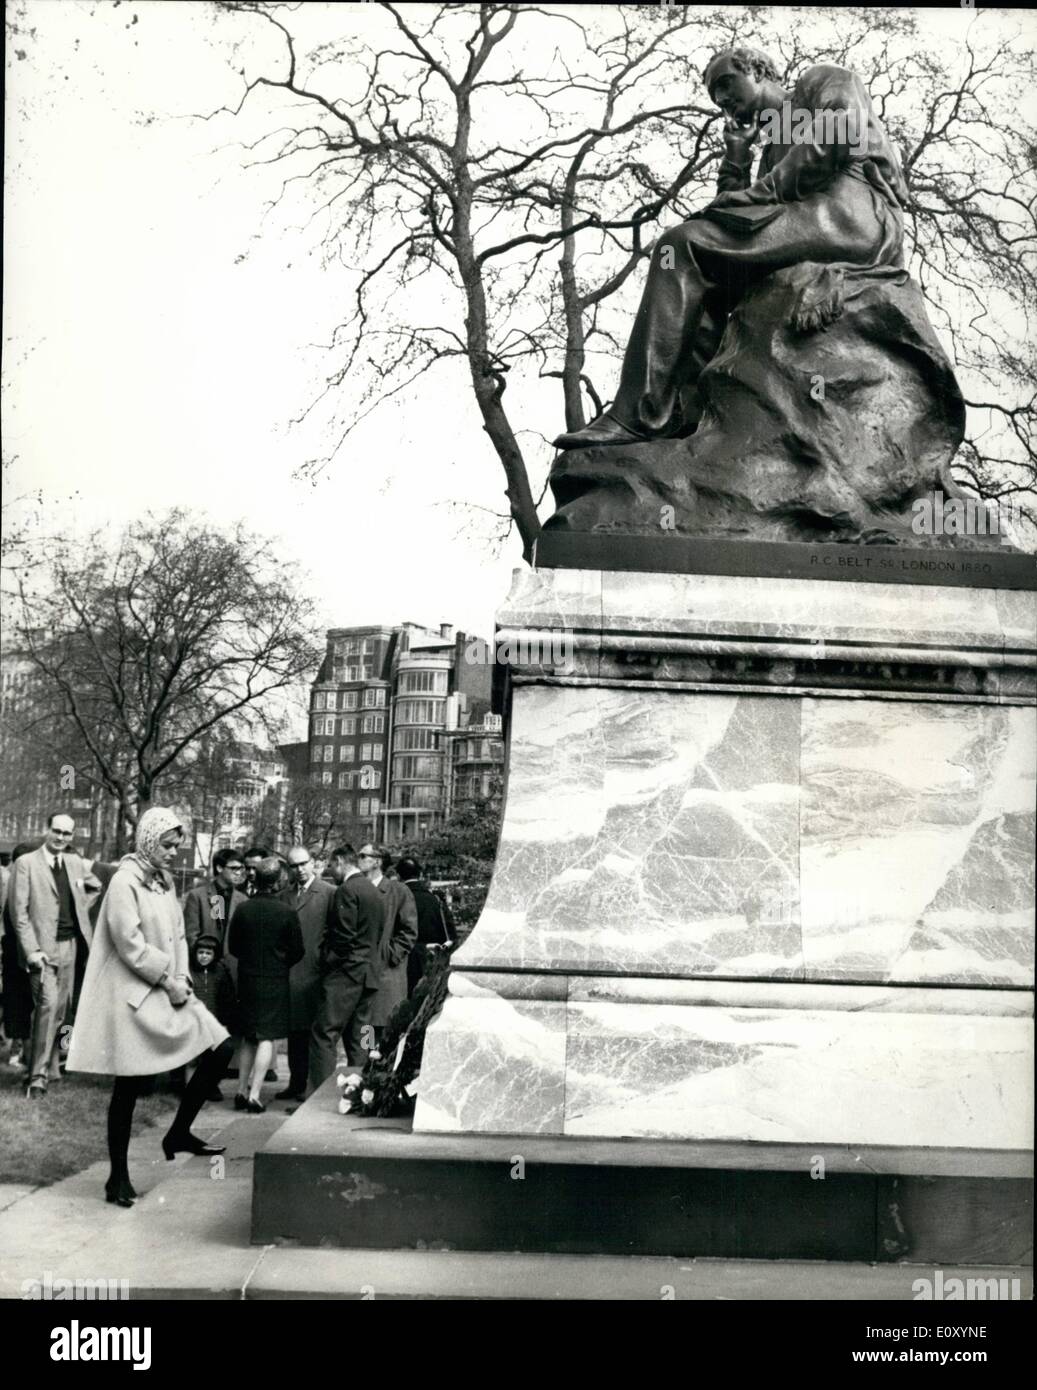 Apr. 04, 1968 - Anniversary Of Death Of Lord Byron. Melina Mercouri Lays Wreath At Statue: Today is the anniversary of the death in 1824 of Lord Byron, who died of malaria at Misselonghi while trying to help the Greeks overthrow their then Turkish aggressors. A wreath was placed at his statue at Hyde Park Corner today by Greek actress, Melina Mercouri, who arrived in London yesterday on her European campaign for the restoration of democracy in Greece. Photo shows A general view showing Melina Mercouri at the statue of Lord Byron after placing a wreath today. Stock Photo